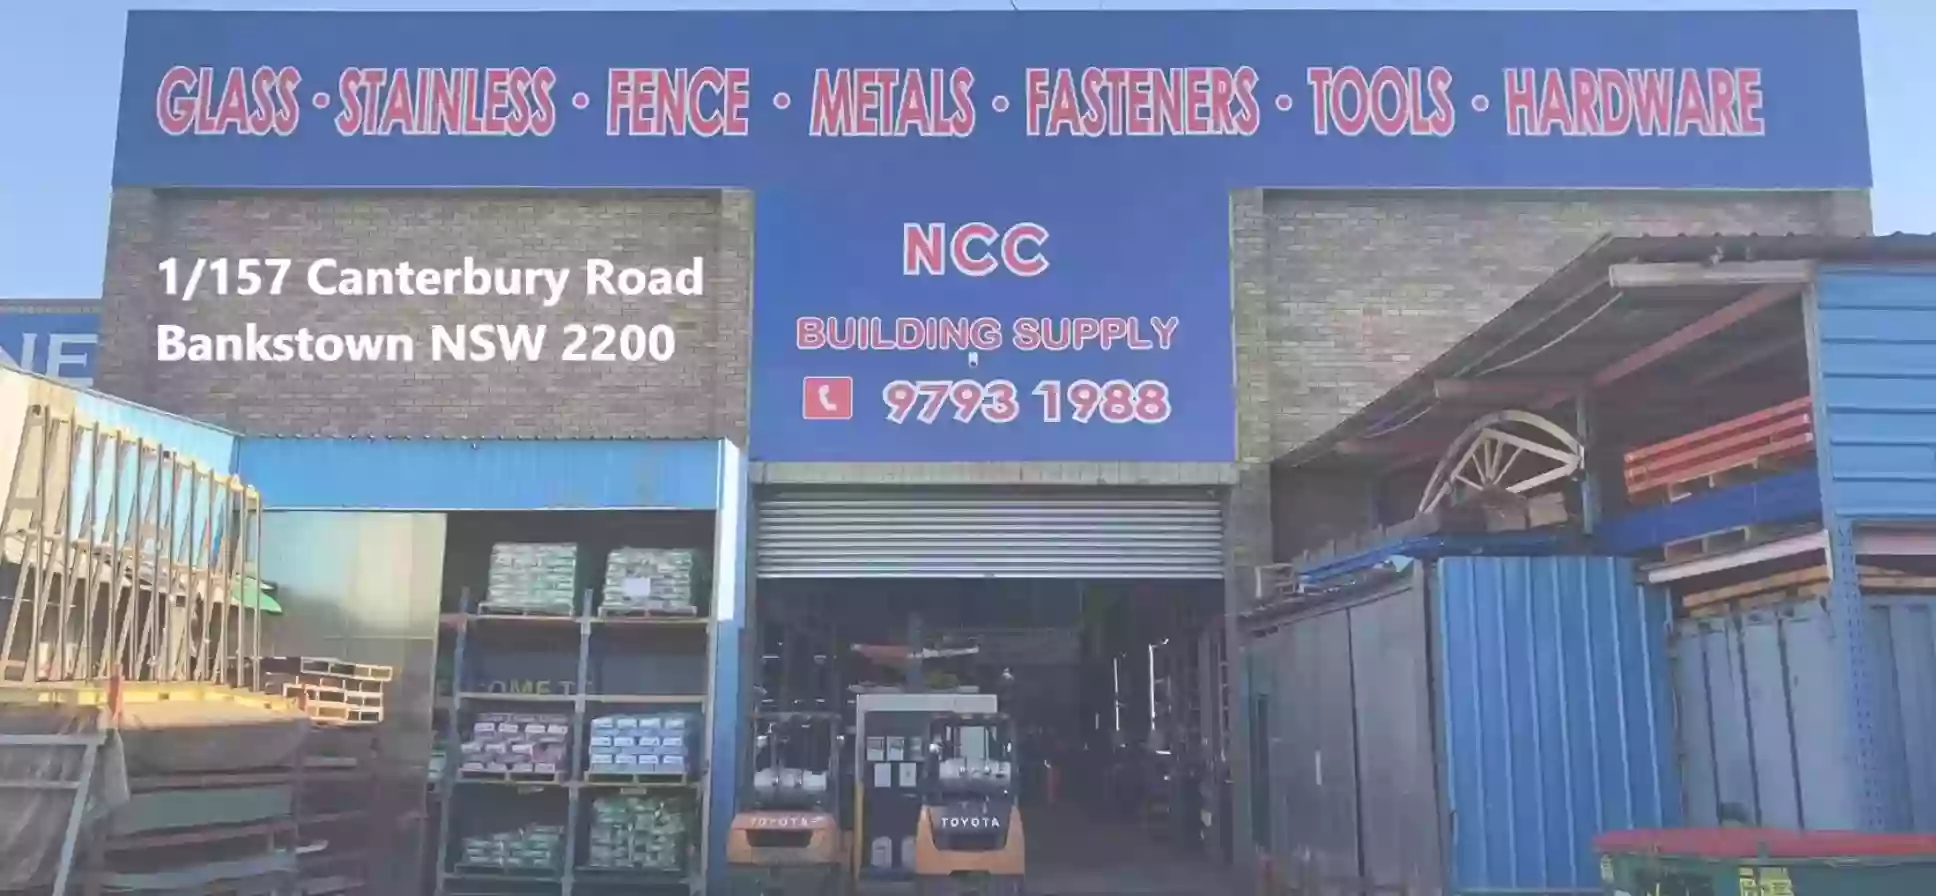 NCC Building Supply